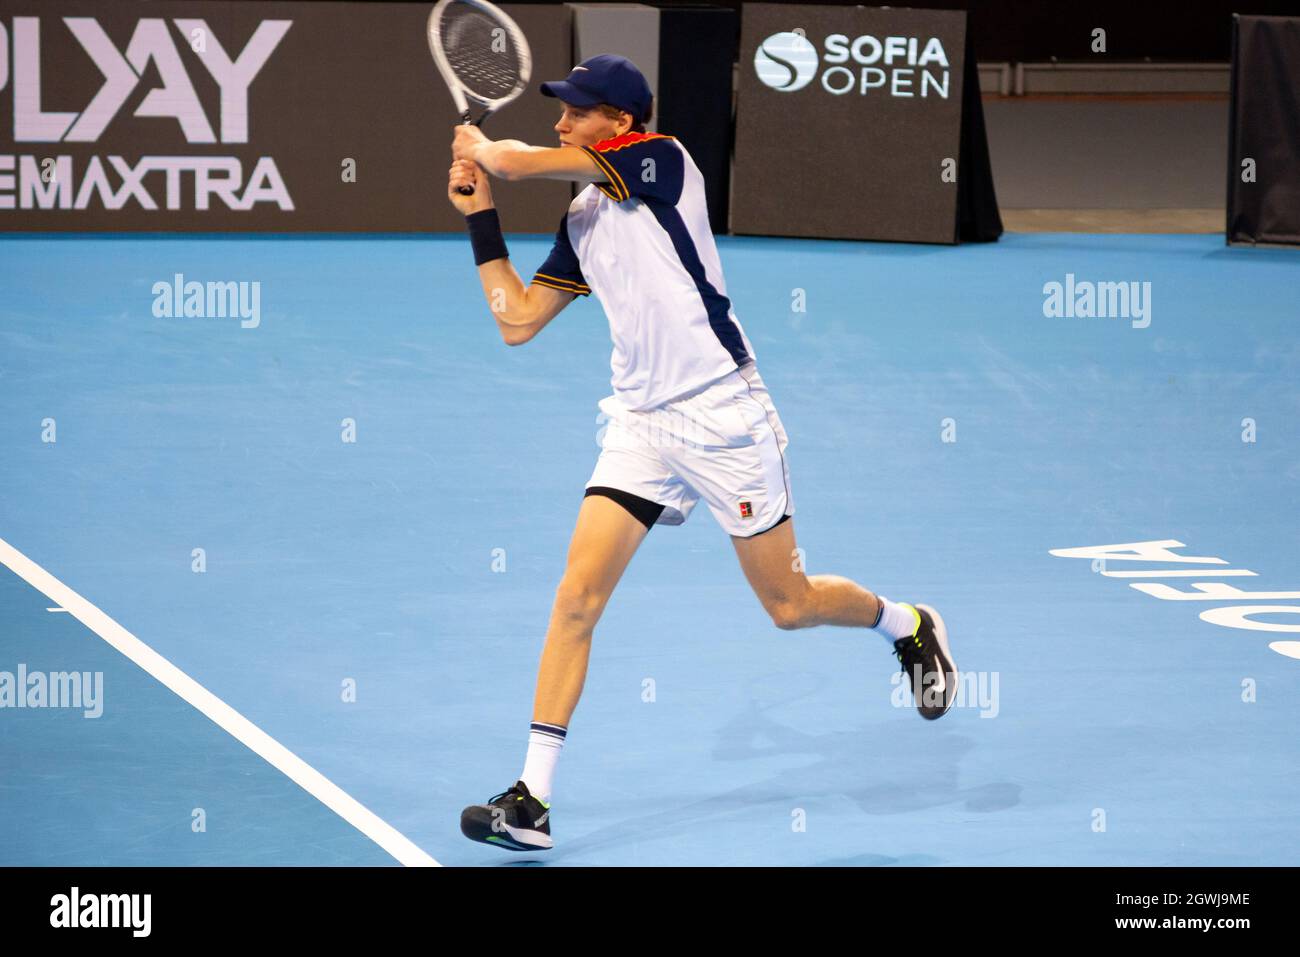 Jannik Sinner playing against Gael Monfils during the final of the Sofia Open 2021 ATP 250 indoor tennis tournament on hard courts Stock Photo